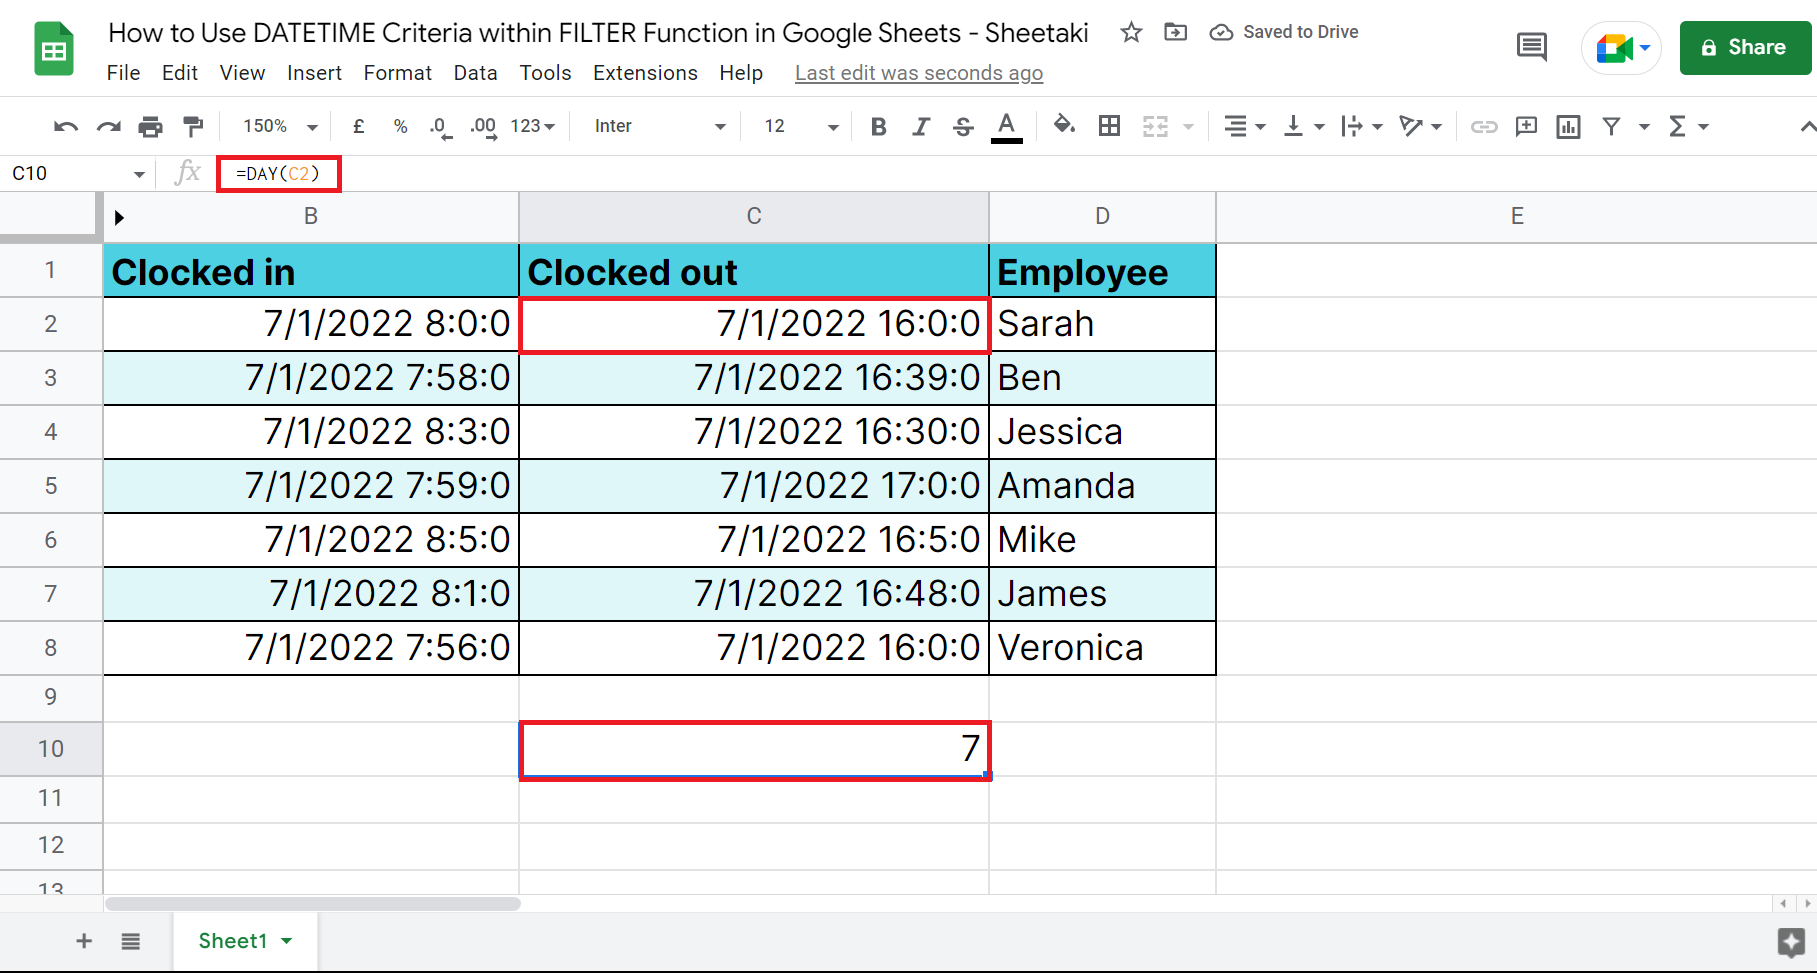 DATETIME Criteria within FILTER Function in Google Sheets